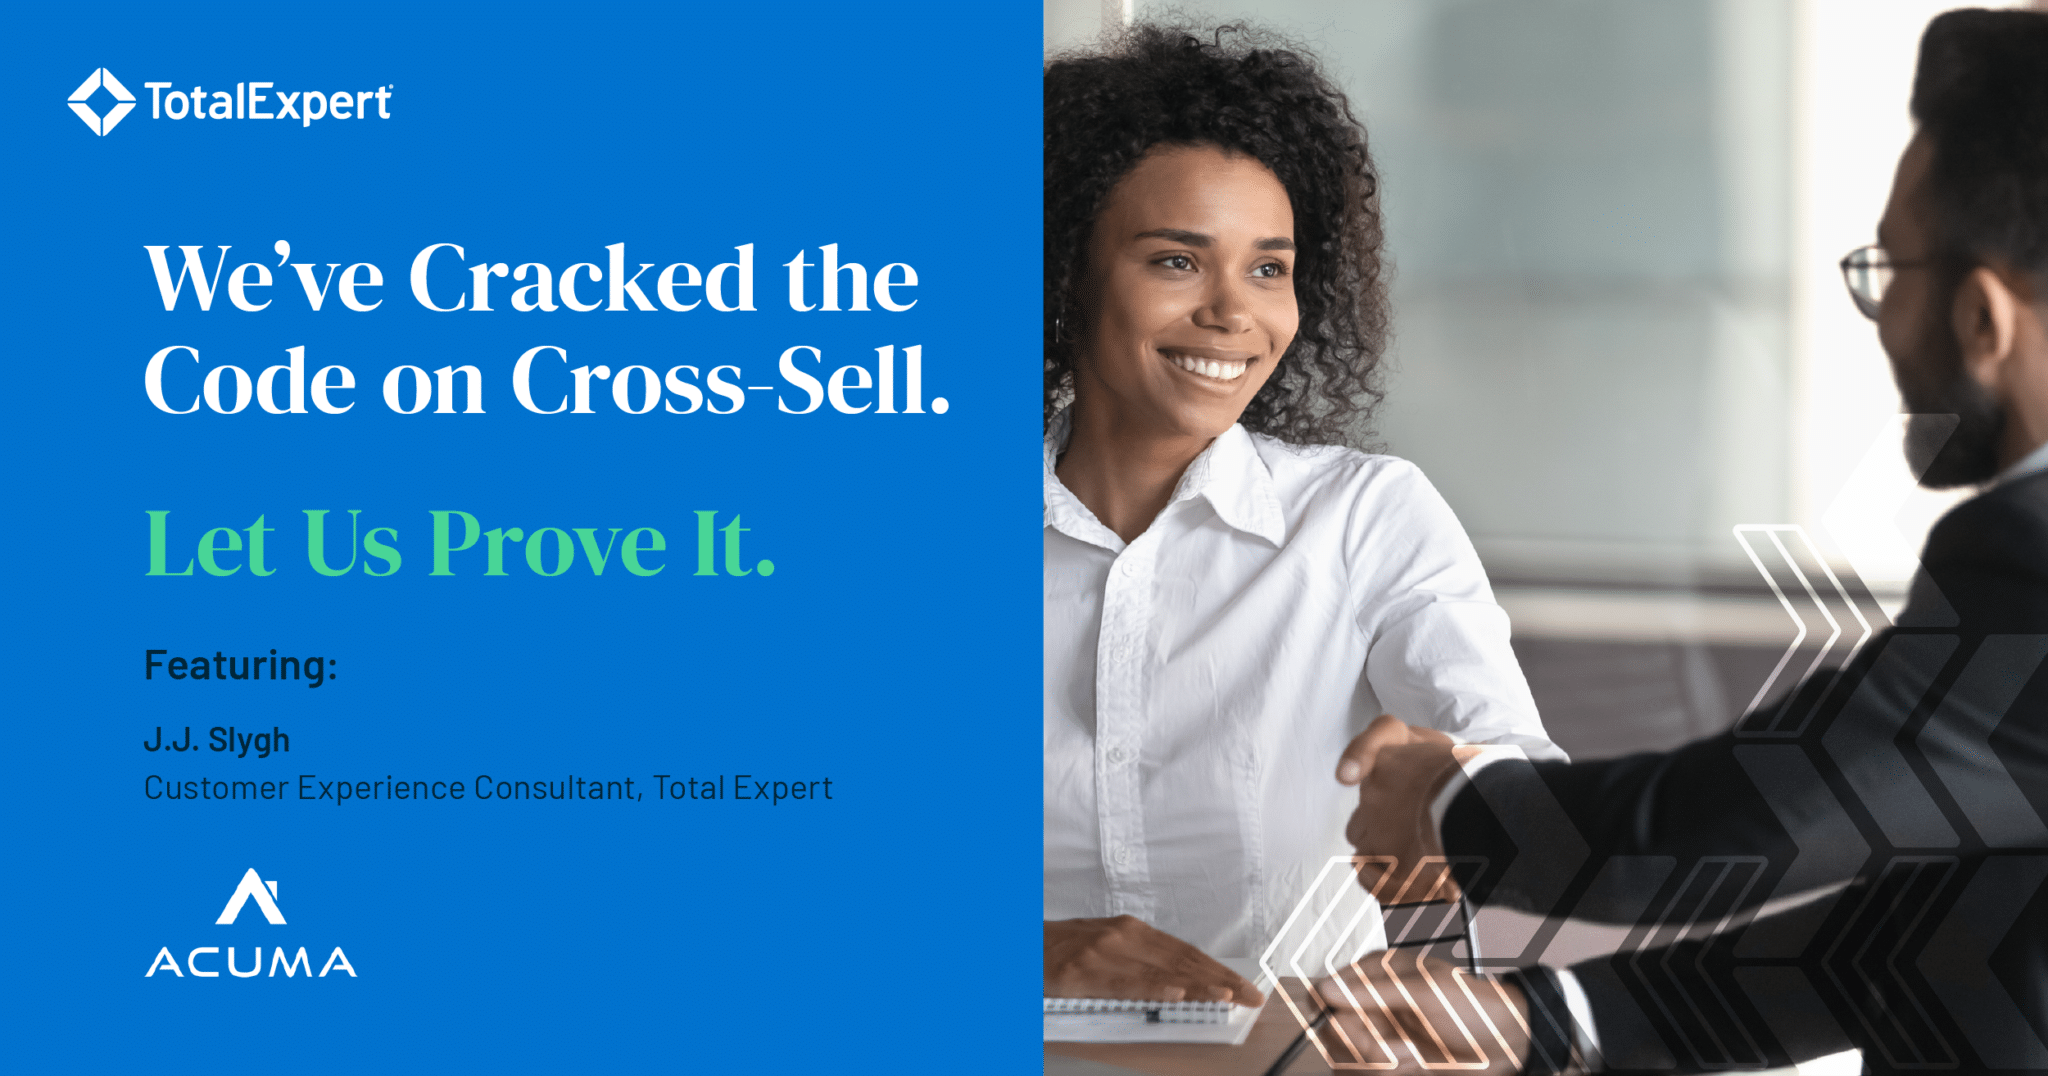 We've Cracked the Code on Cross-Sell